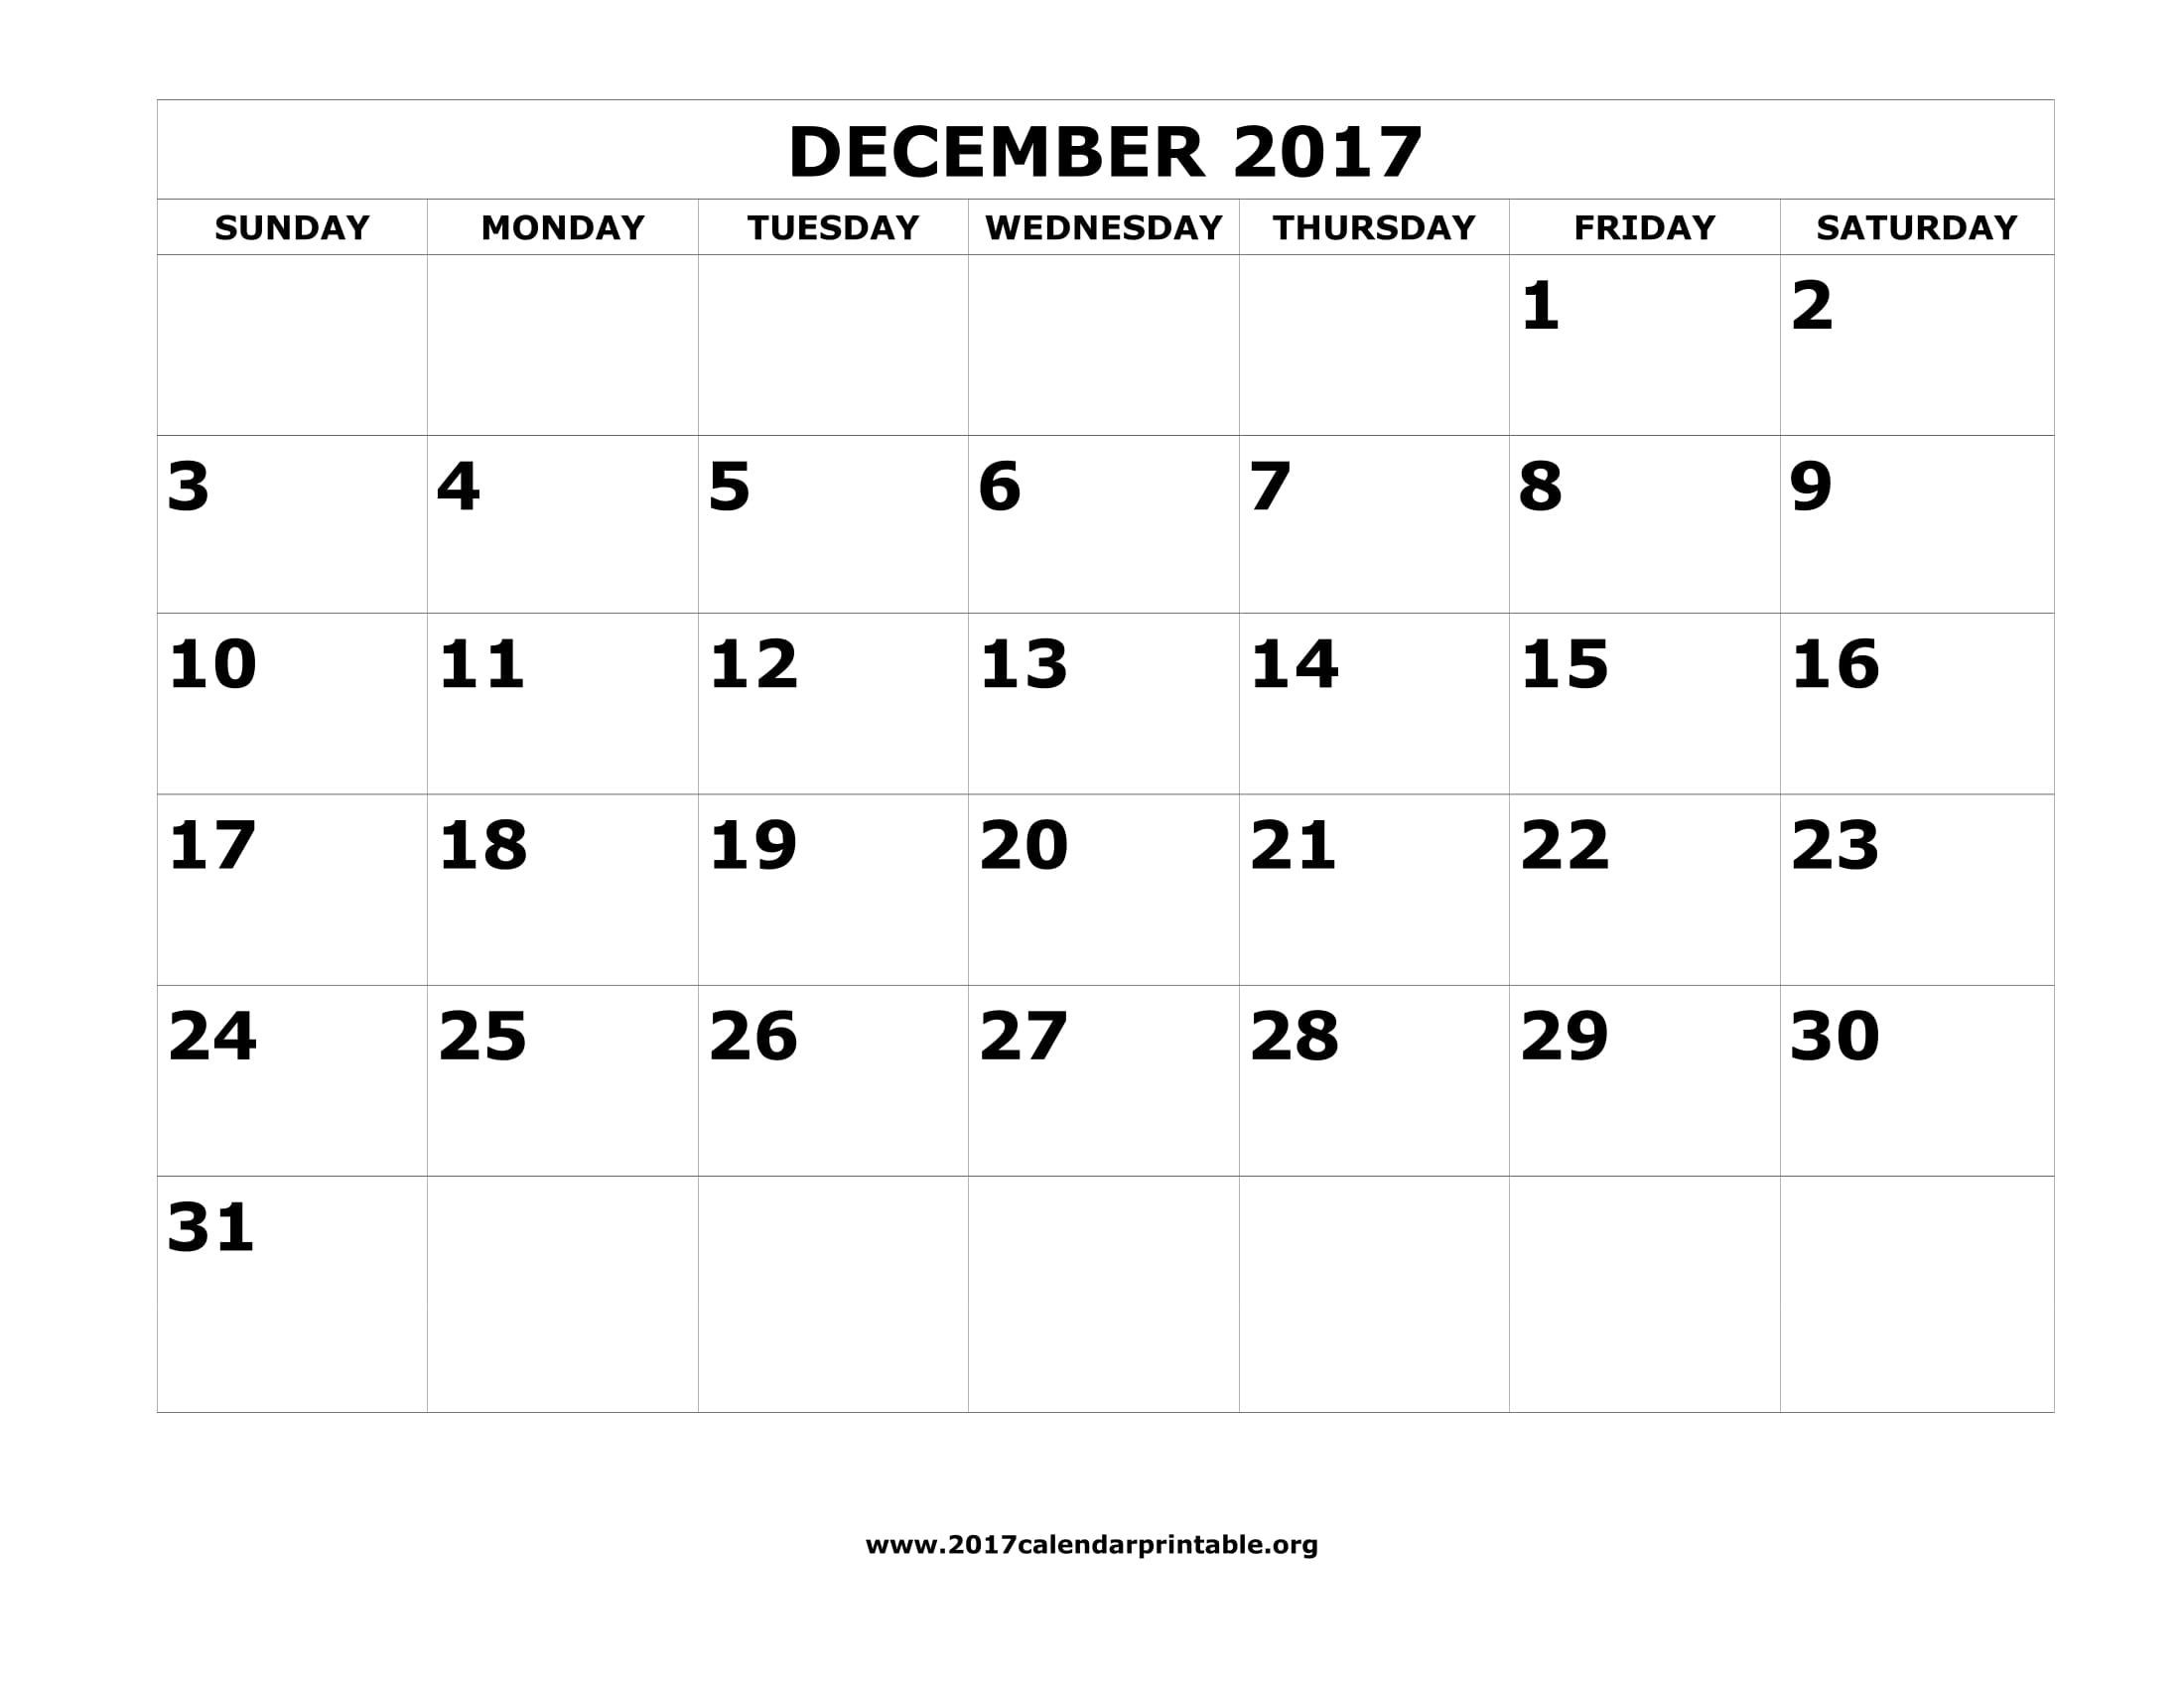 Download December 2017 Calendar Printable With Federal Holidays And